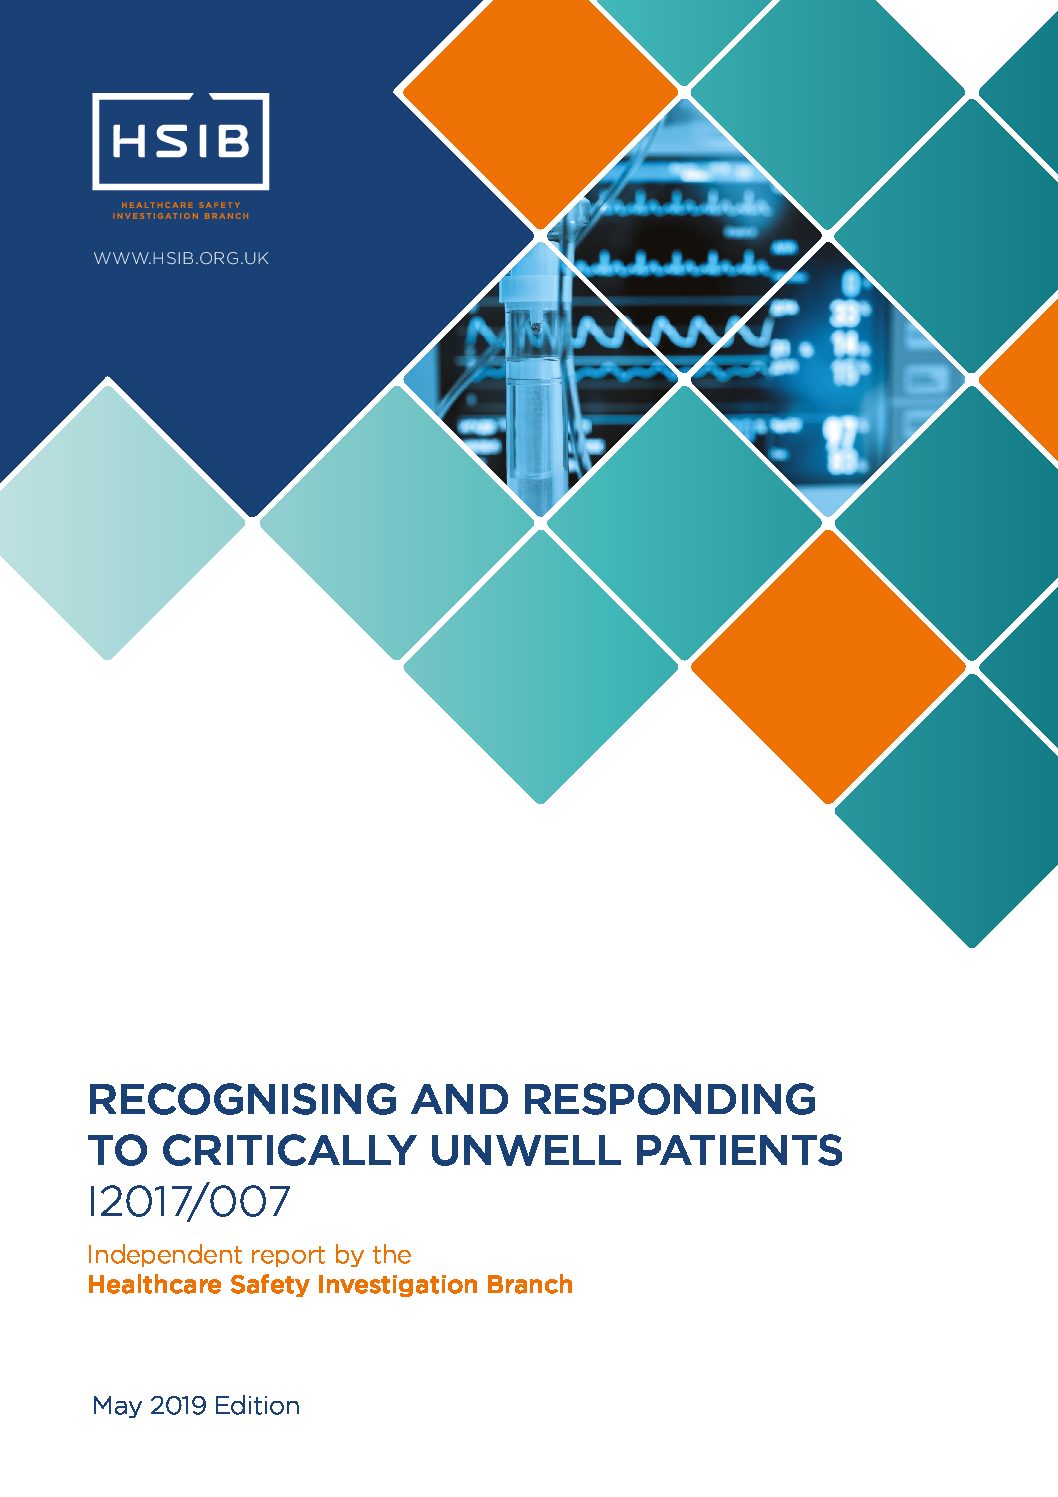 HSIB Full Report, Recognising and responding to critically unwell patients